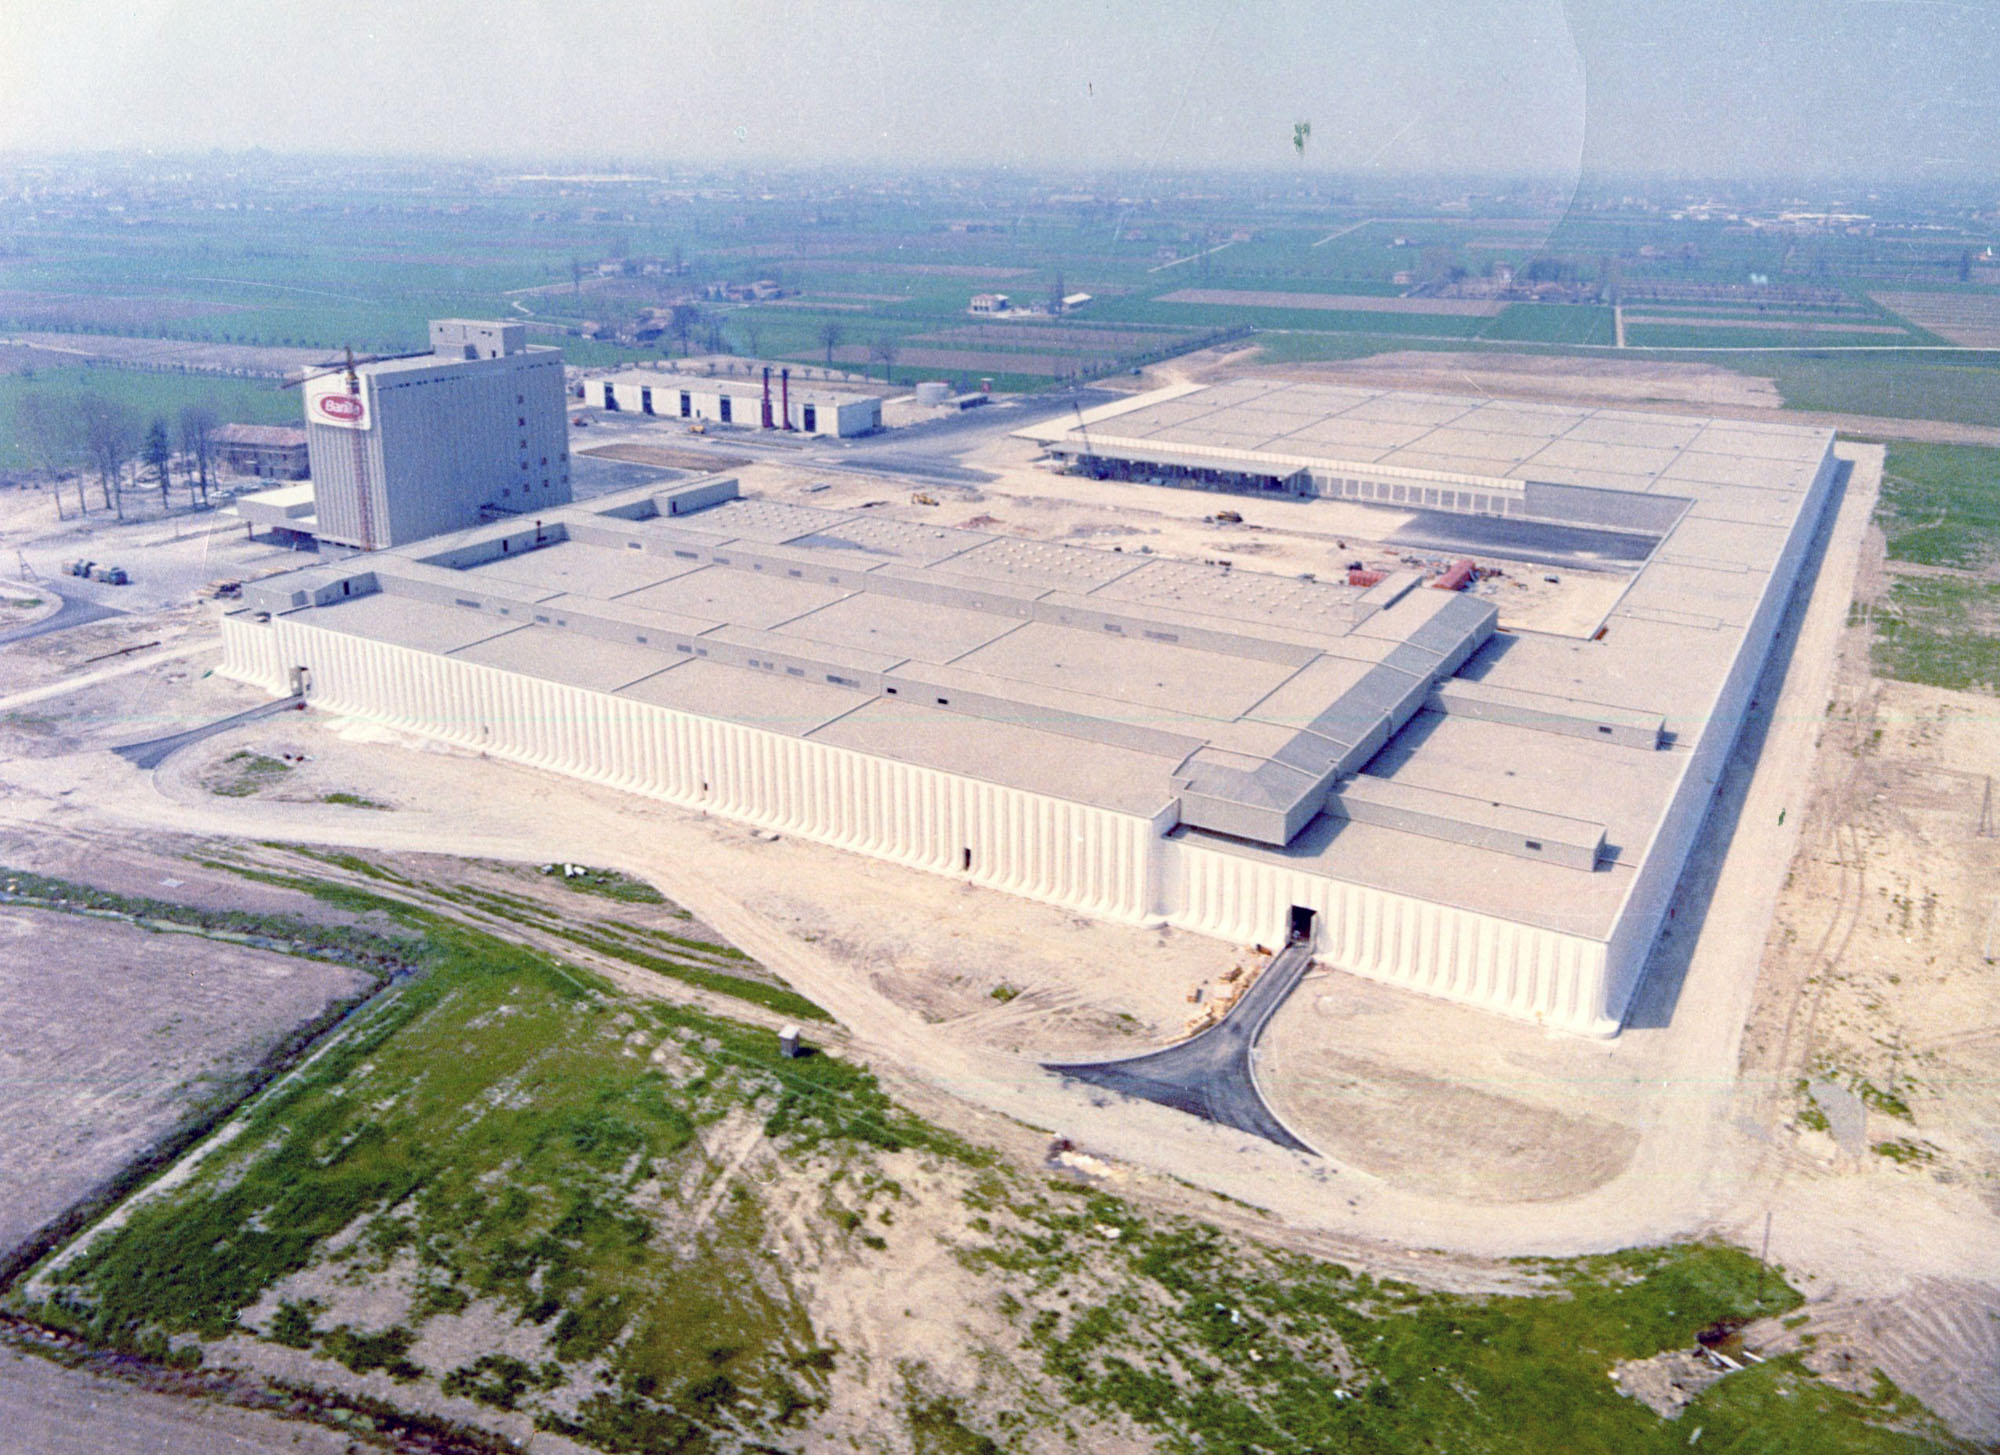 1969 - The new Pedrignano Plant is built along the Autostrada del Sole [Italian popular Northern Highway]